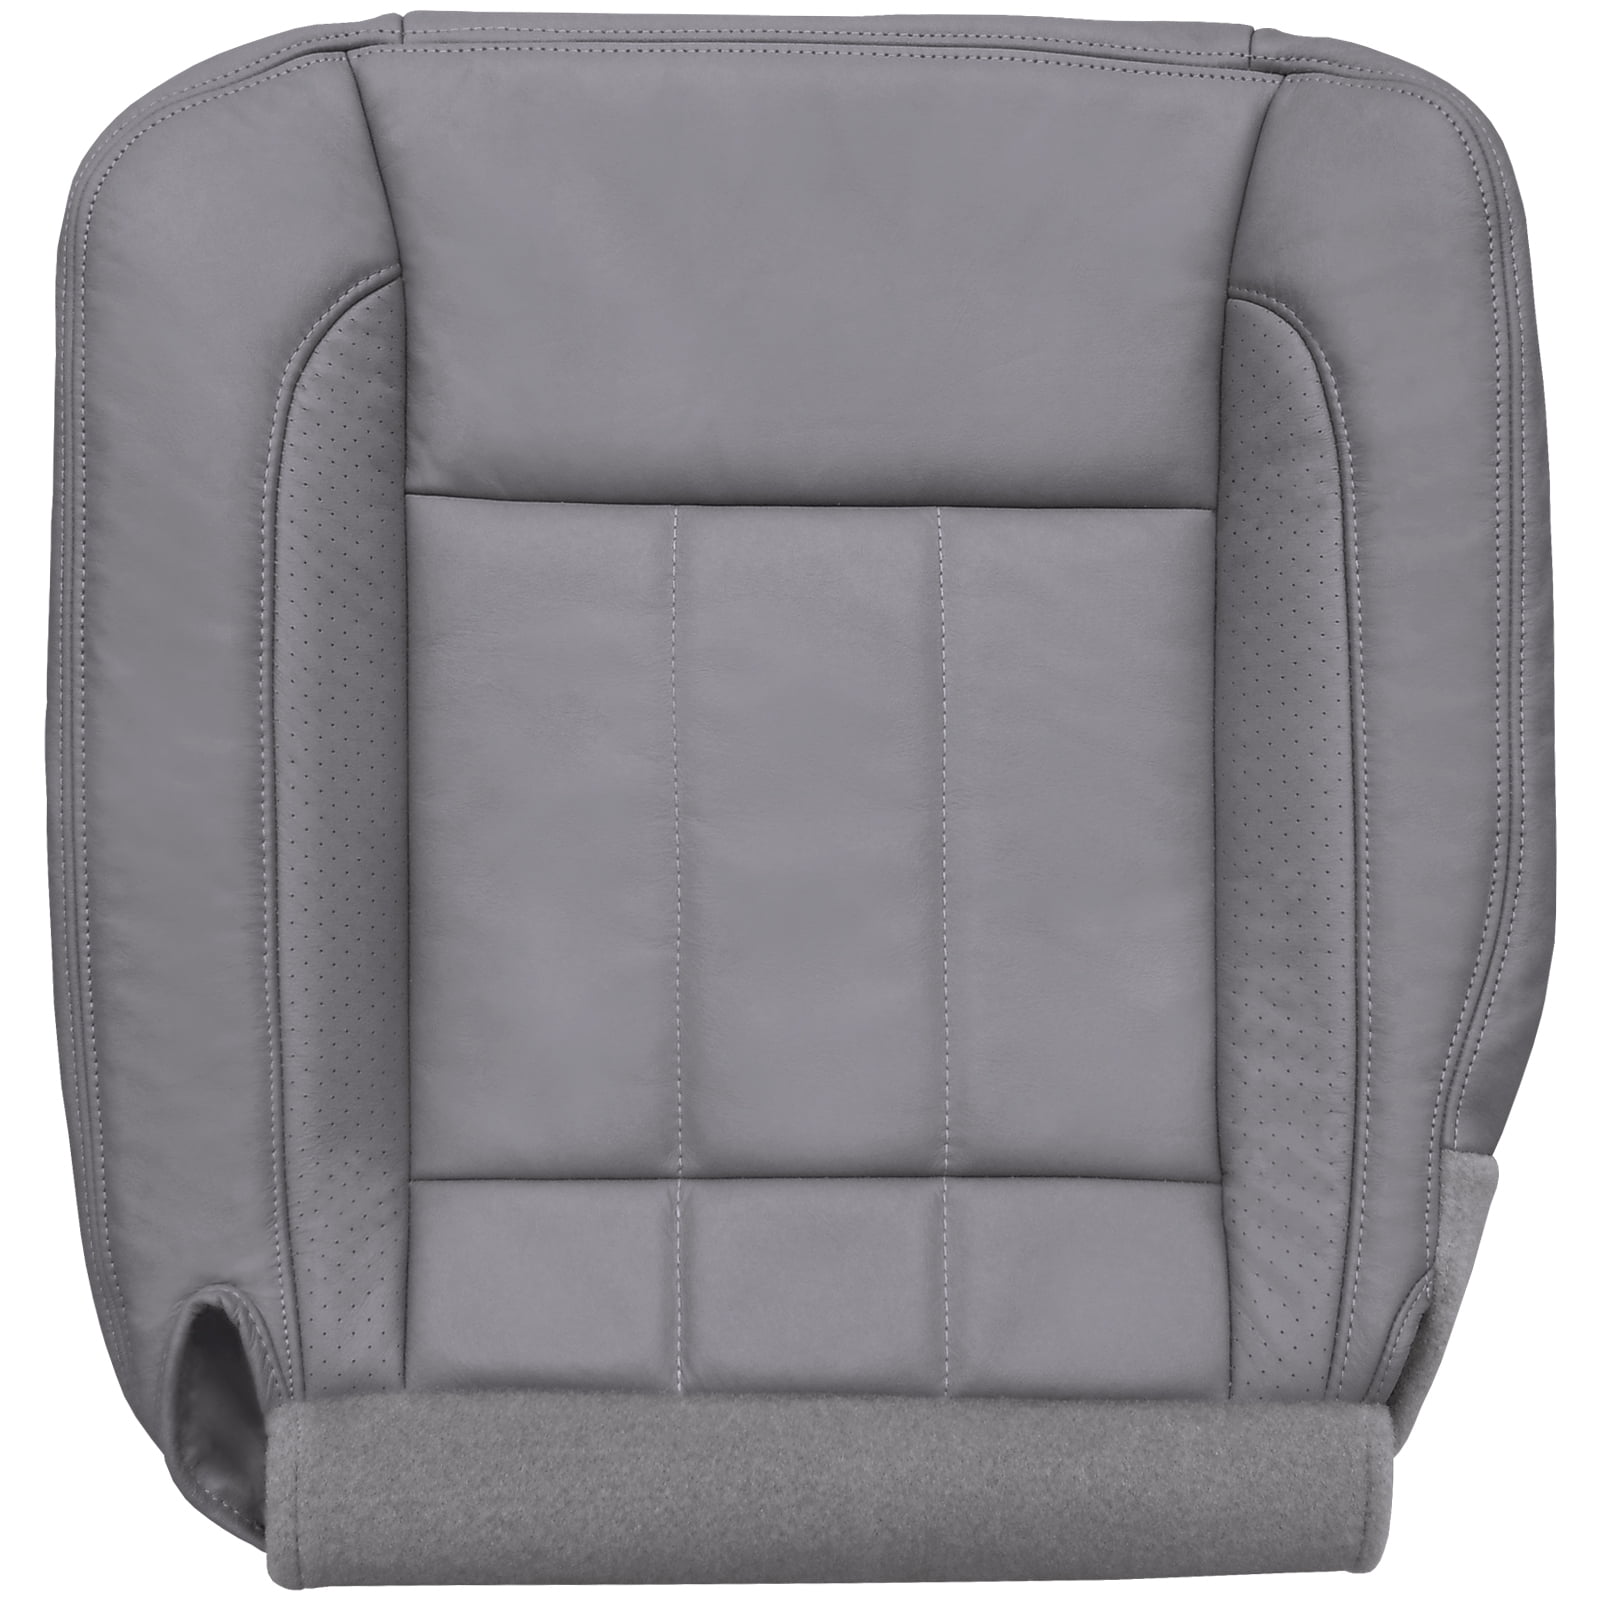 2006 Dodge Ram 1500 Replacement Seat Covers